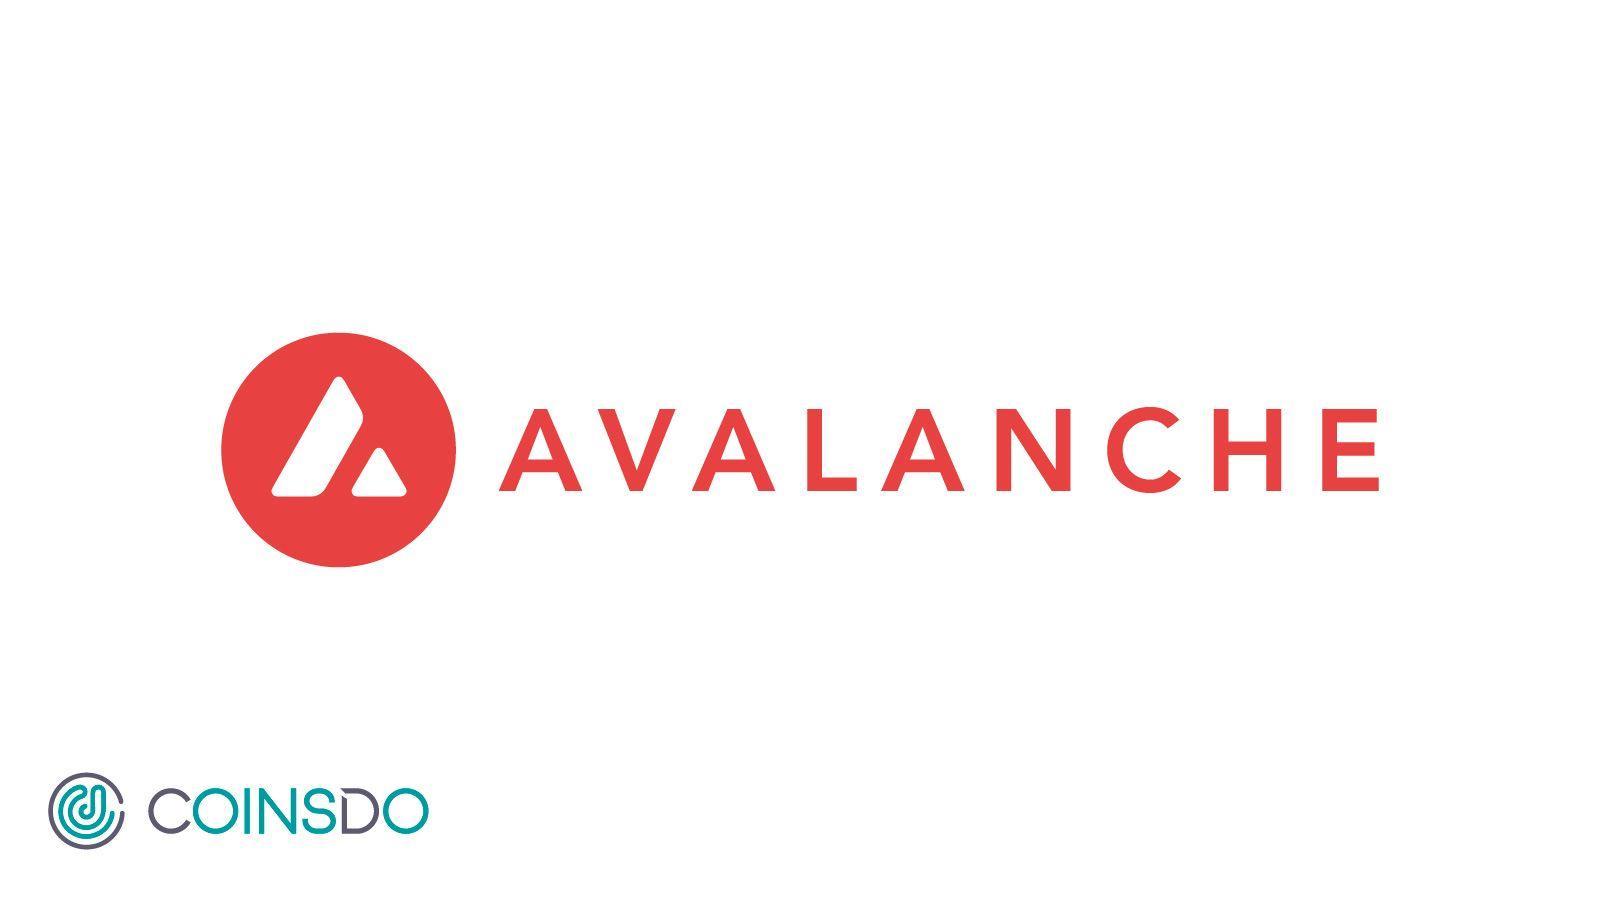 What is Avalanche?